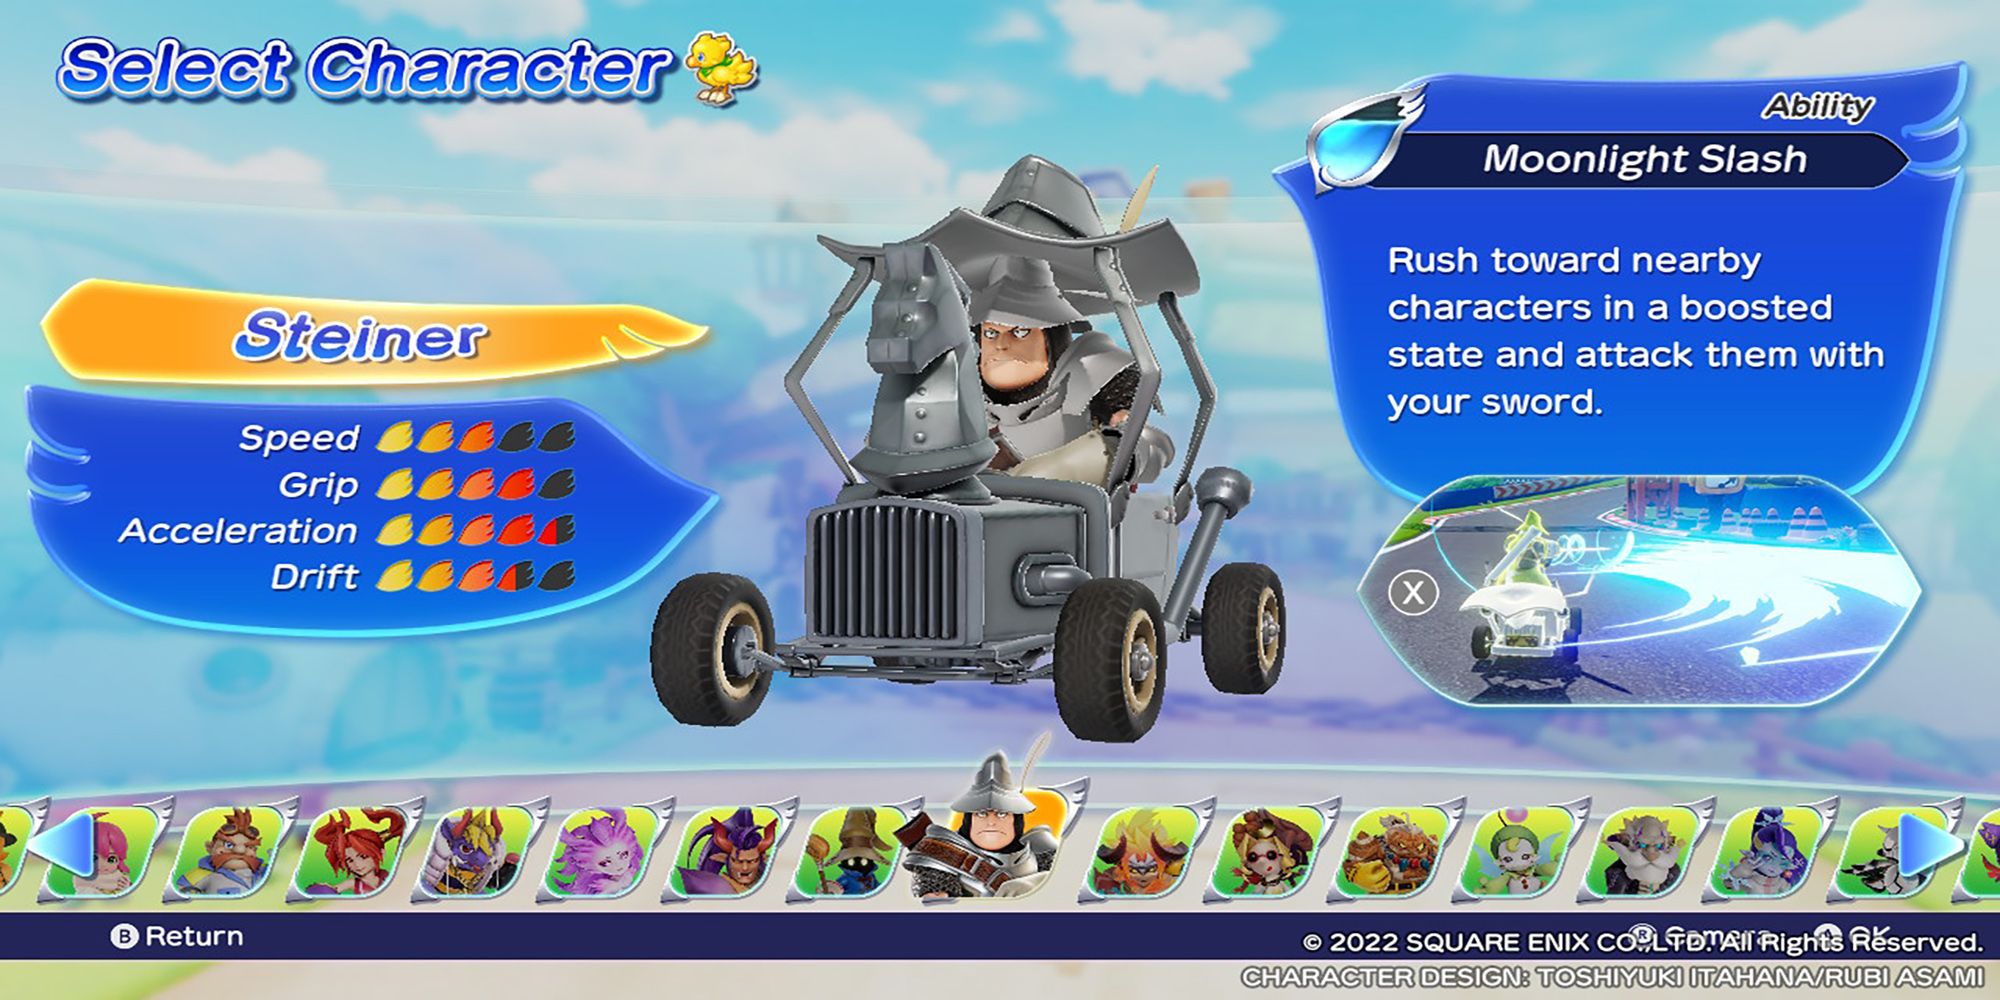 Steiner's character model, along with his stats and abilities, in the Select Character menu. Chocobo GP.